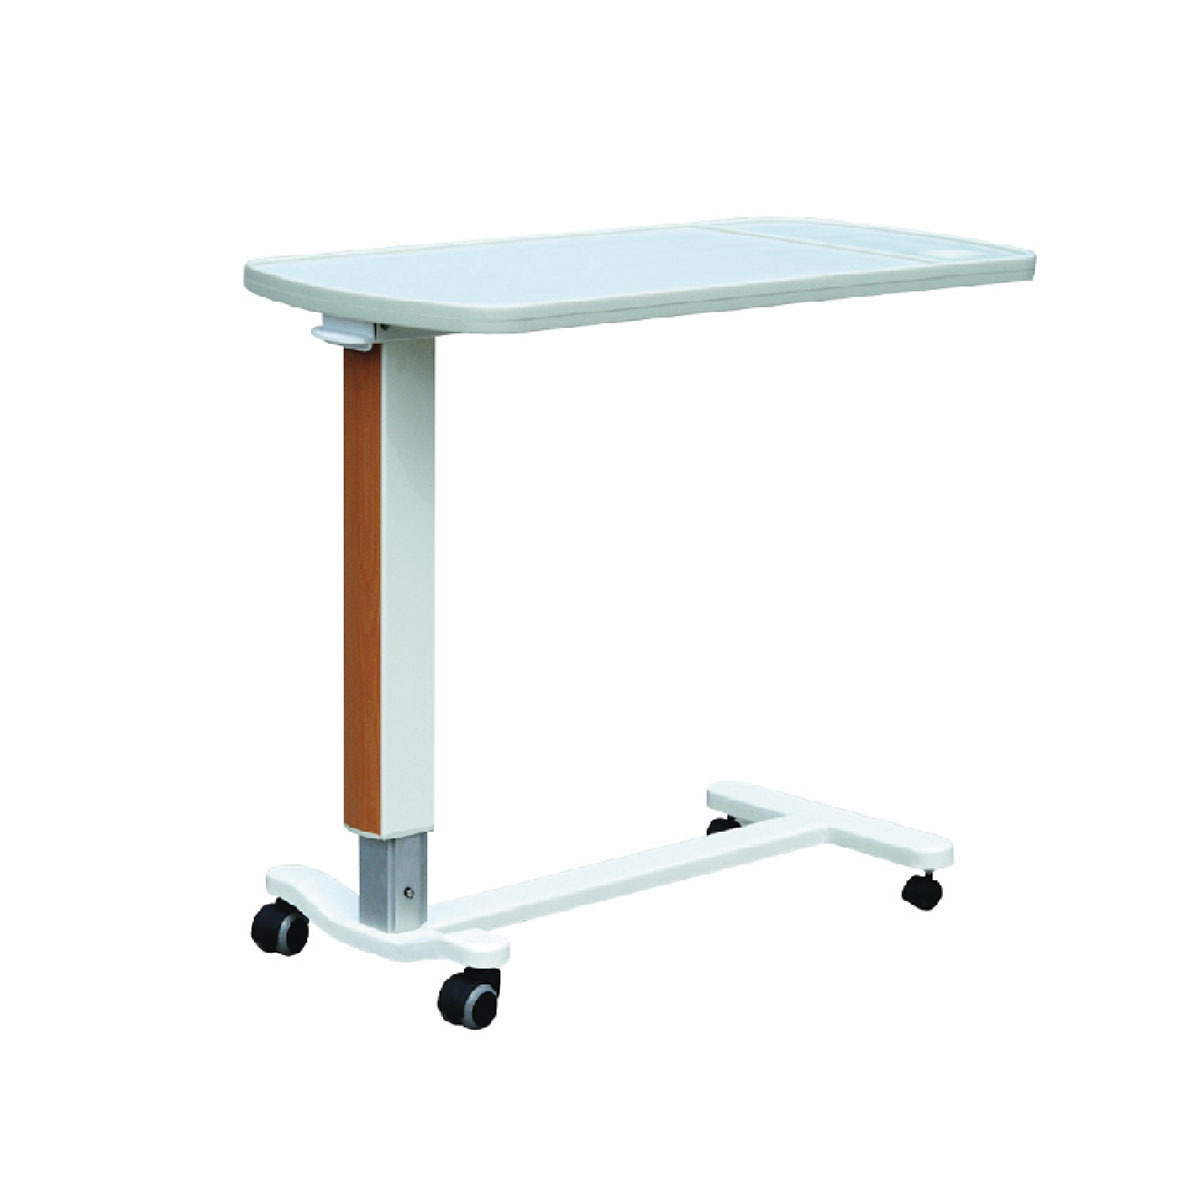 HL-D612A Over bed table